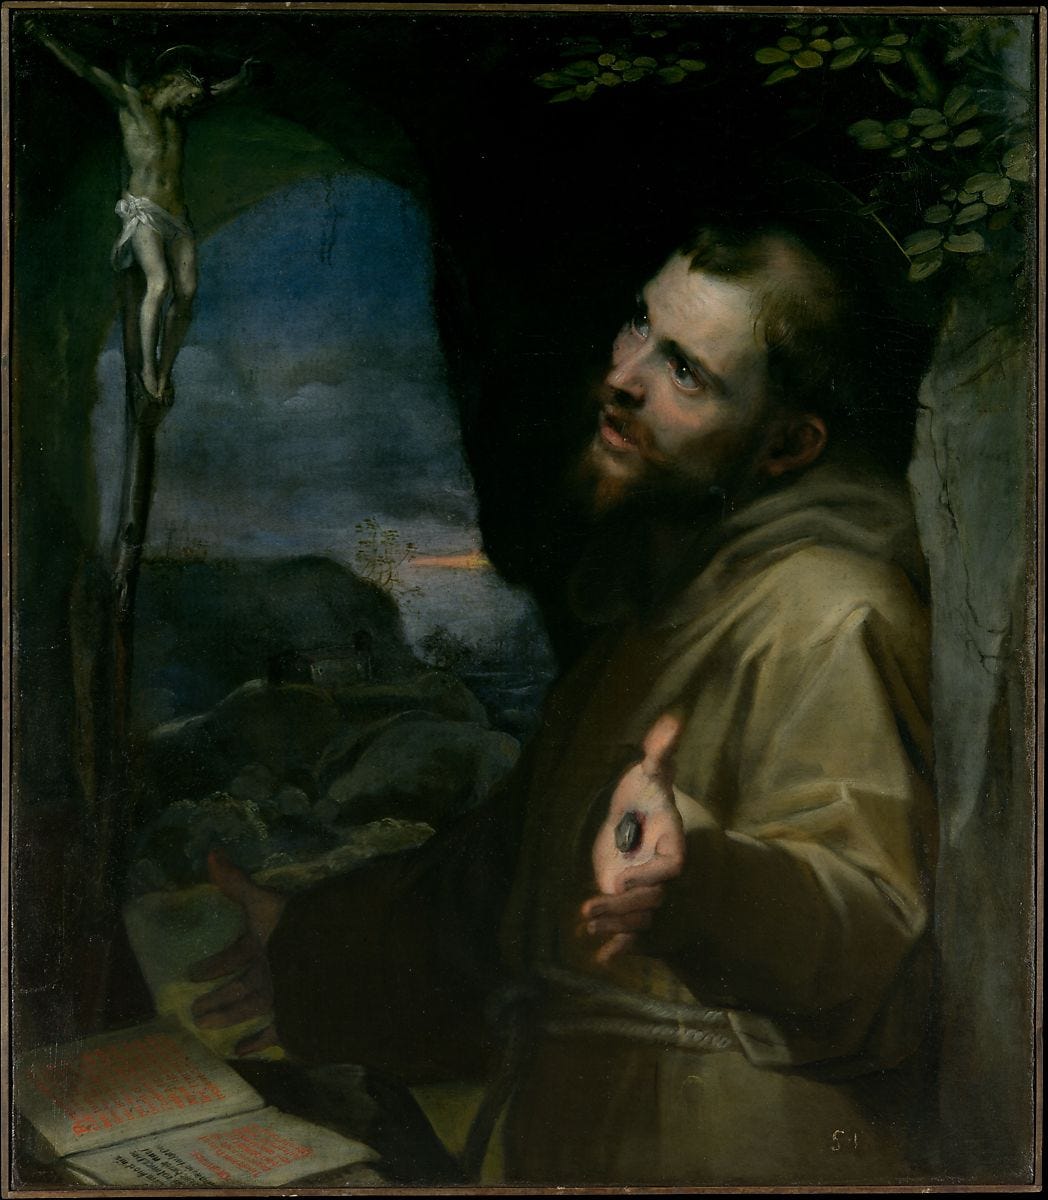 St. Francis, 'Starting Seven,' and the news